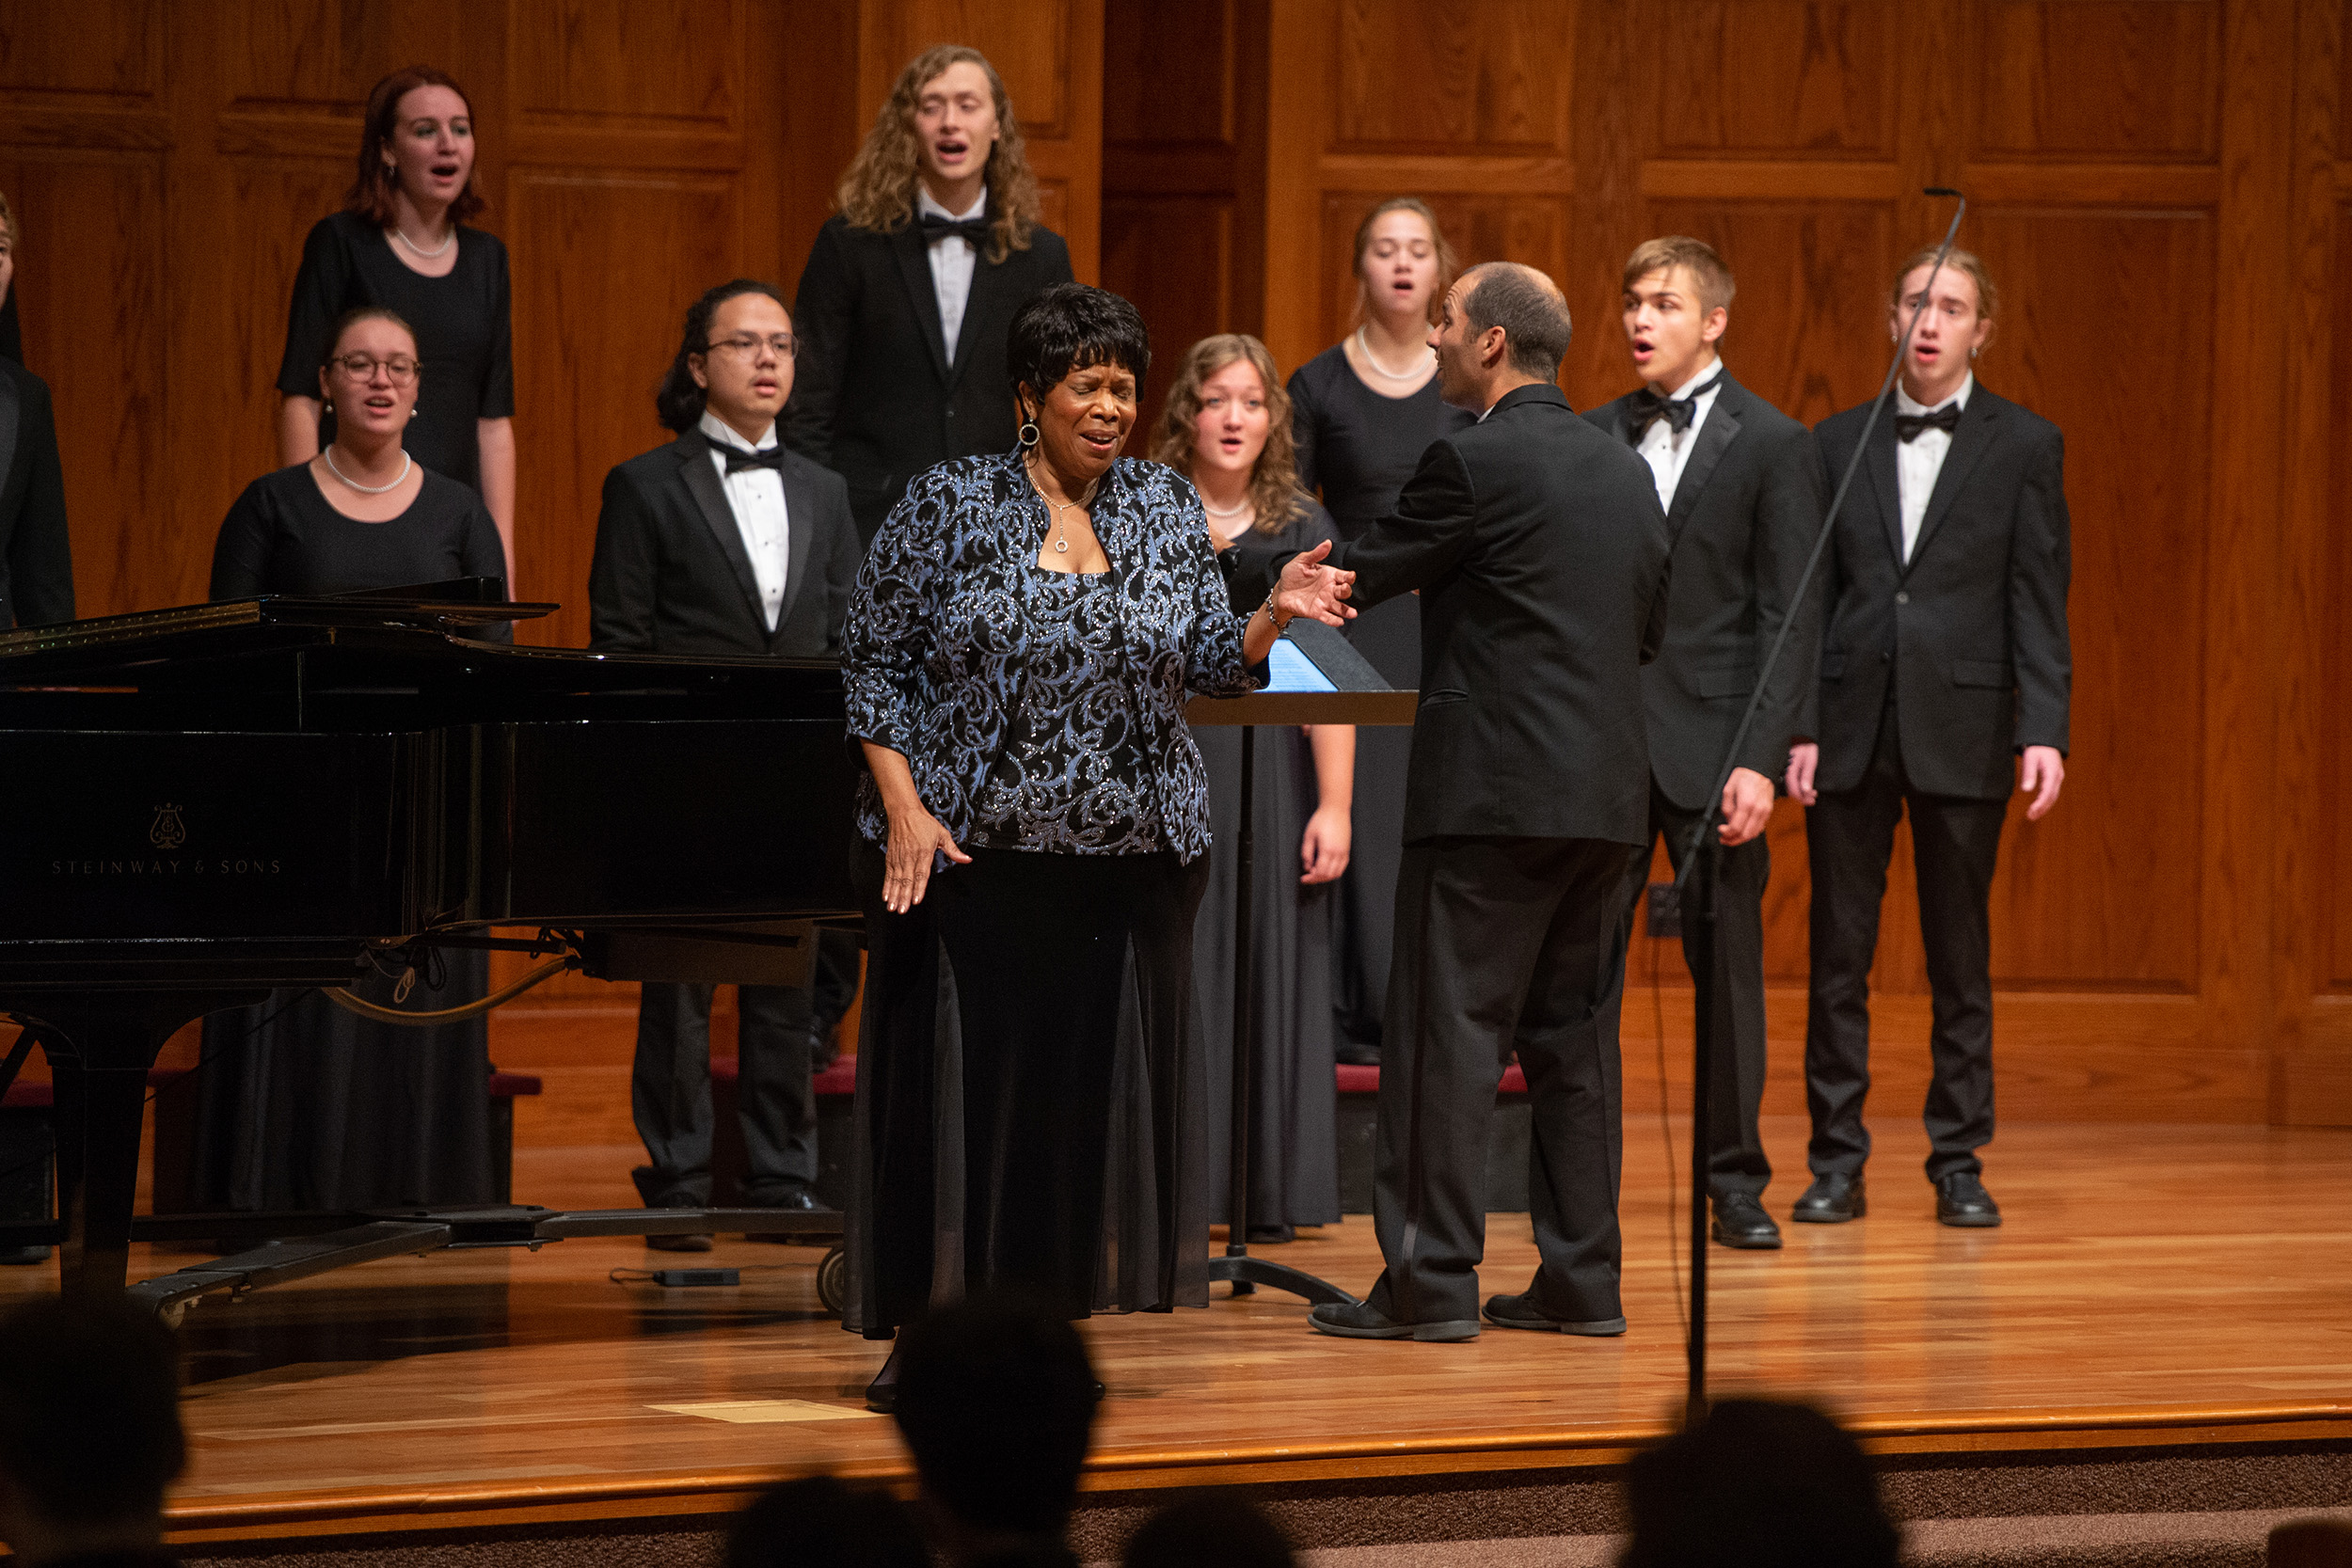 Songs by African American Composers performed by Dr. Carren Moham and Bel Canto Singers at Hesston College Homecoming 2022